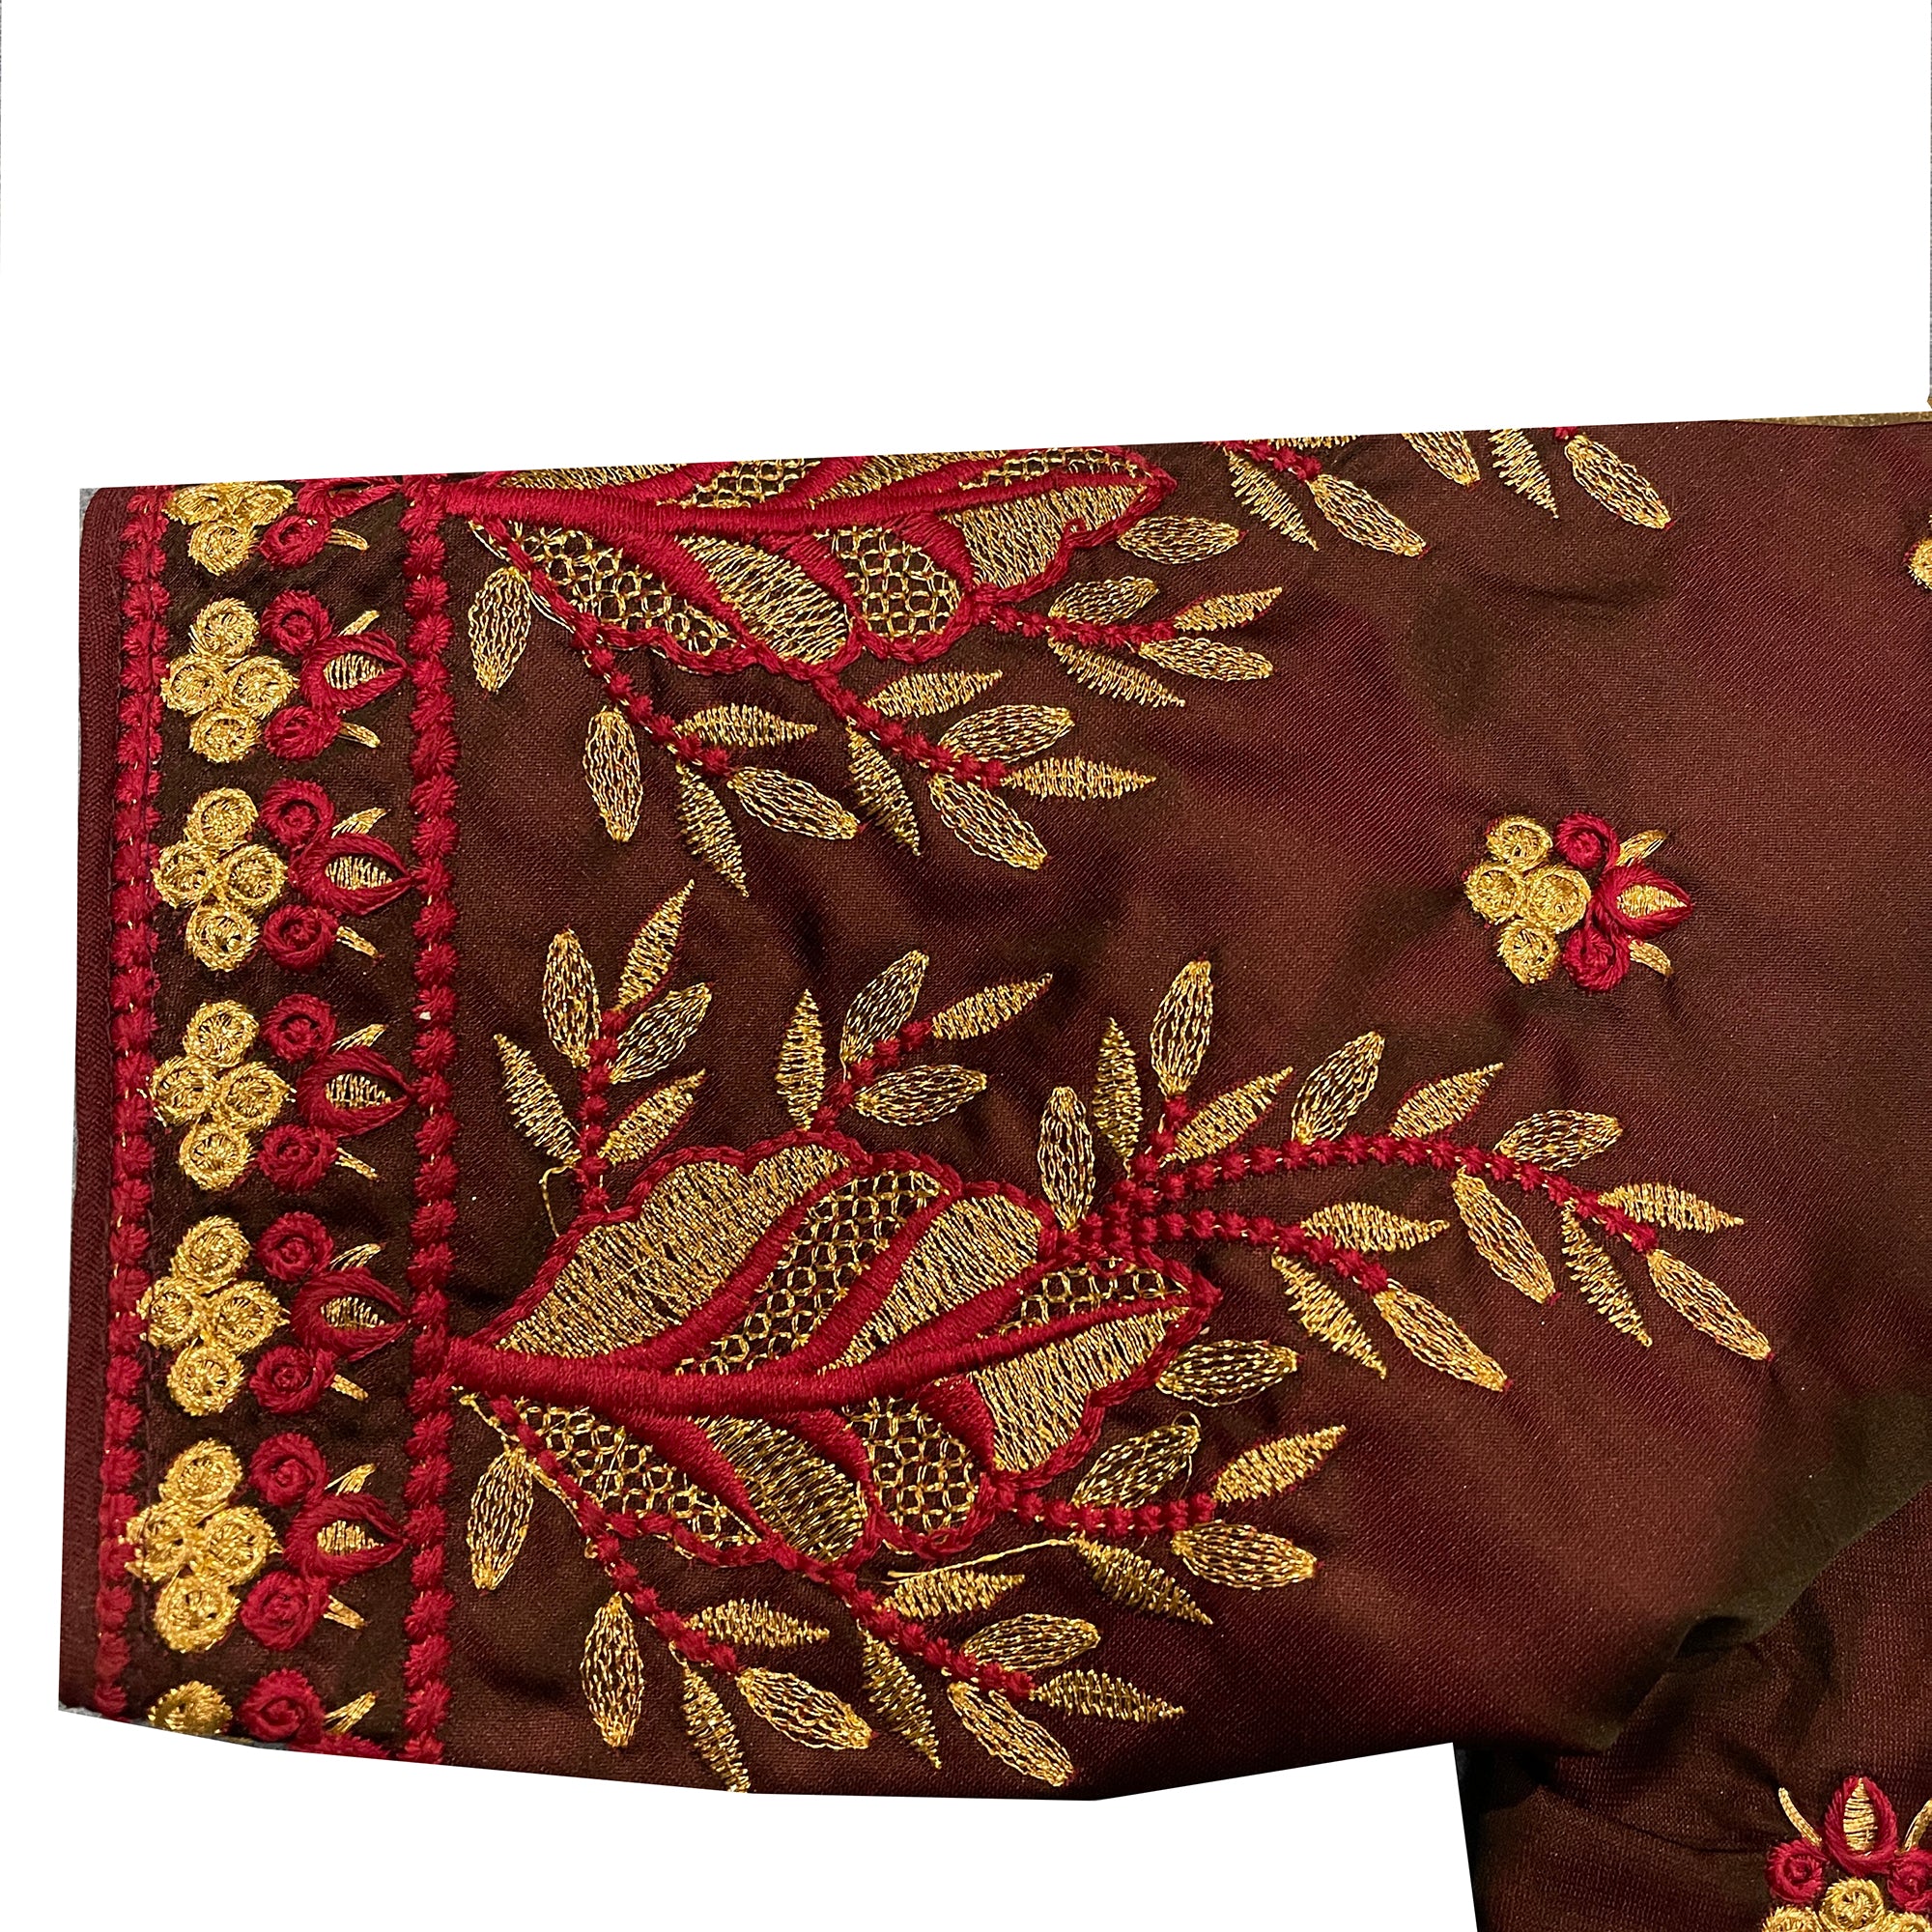 Embroidered Maroon Blouse - Vintage India NYC